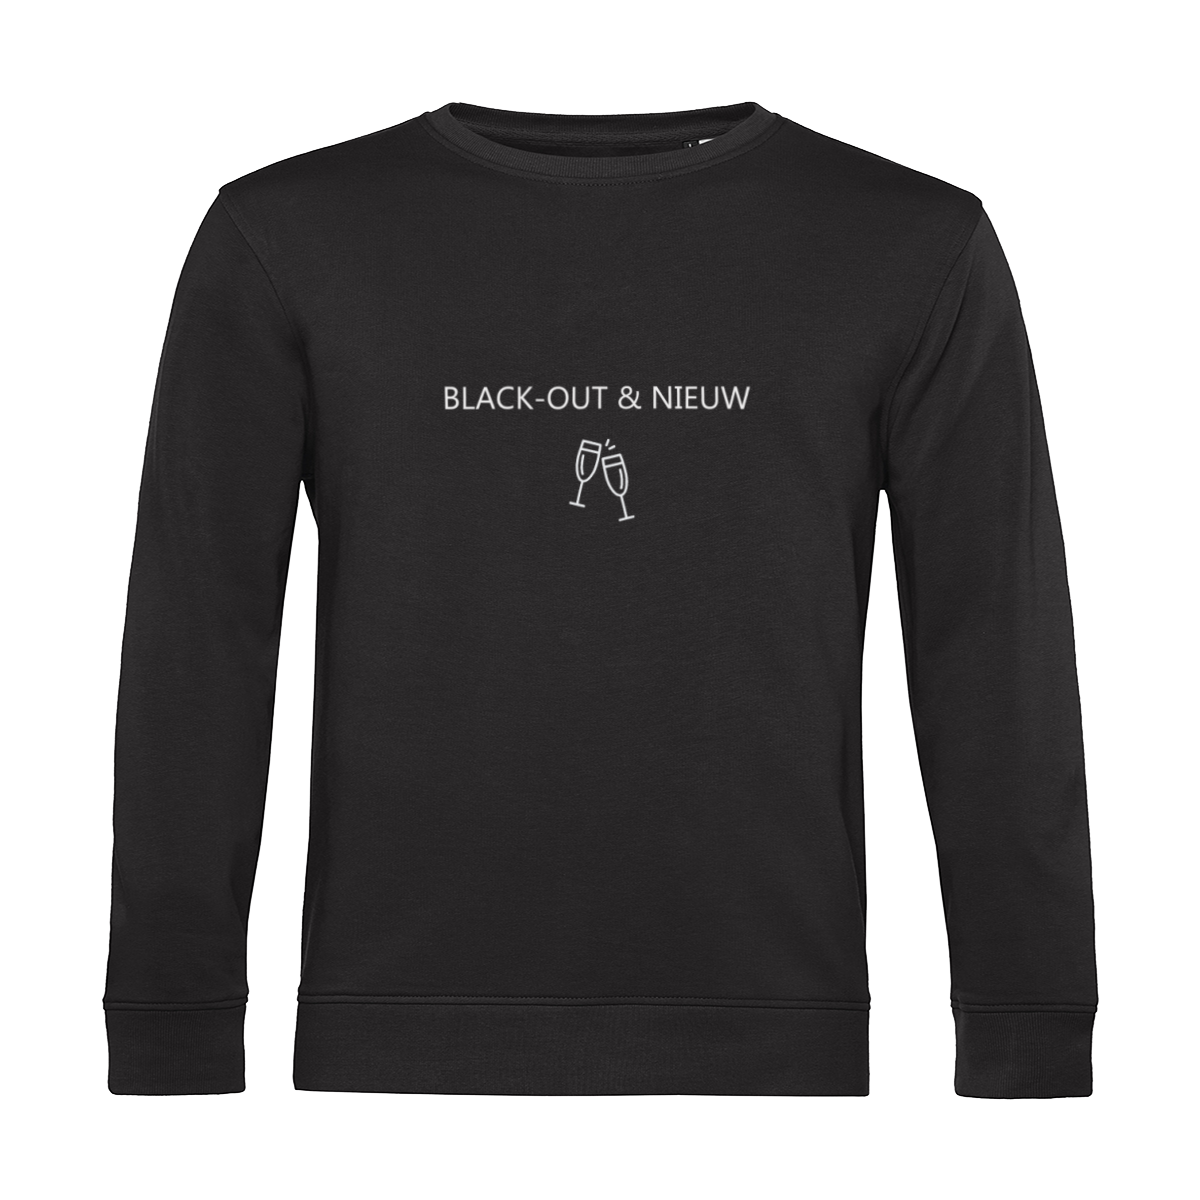 Black-out & nieuw | Sweater